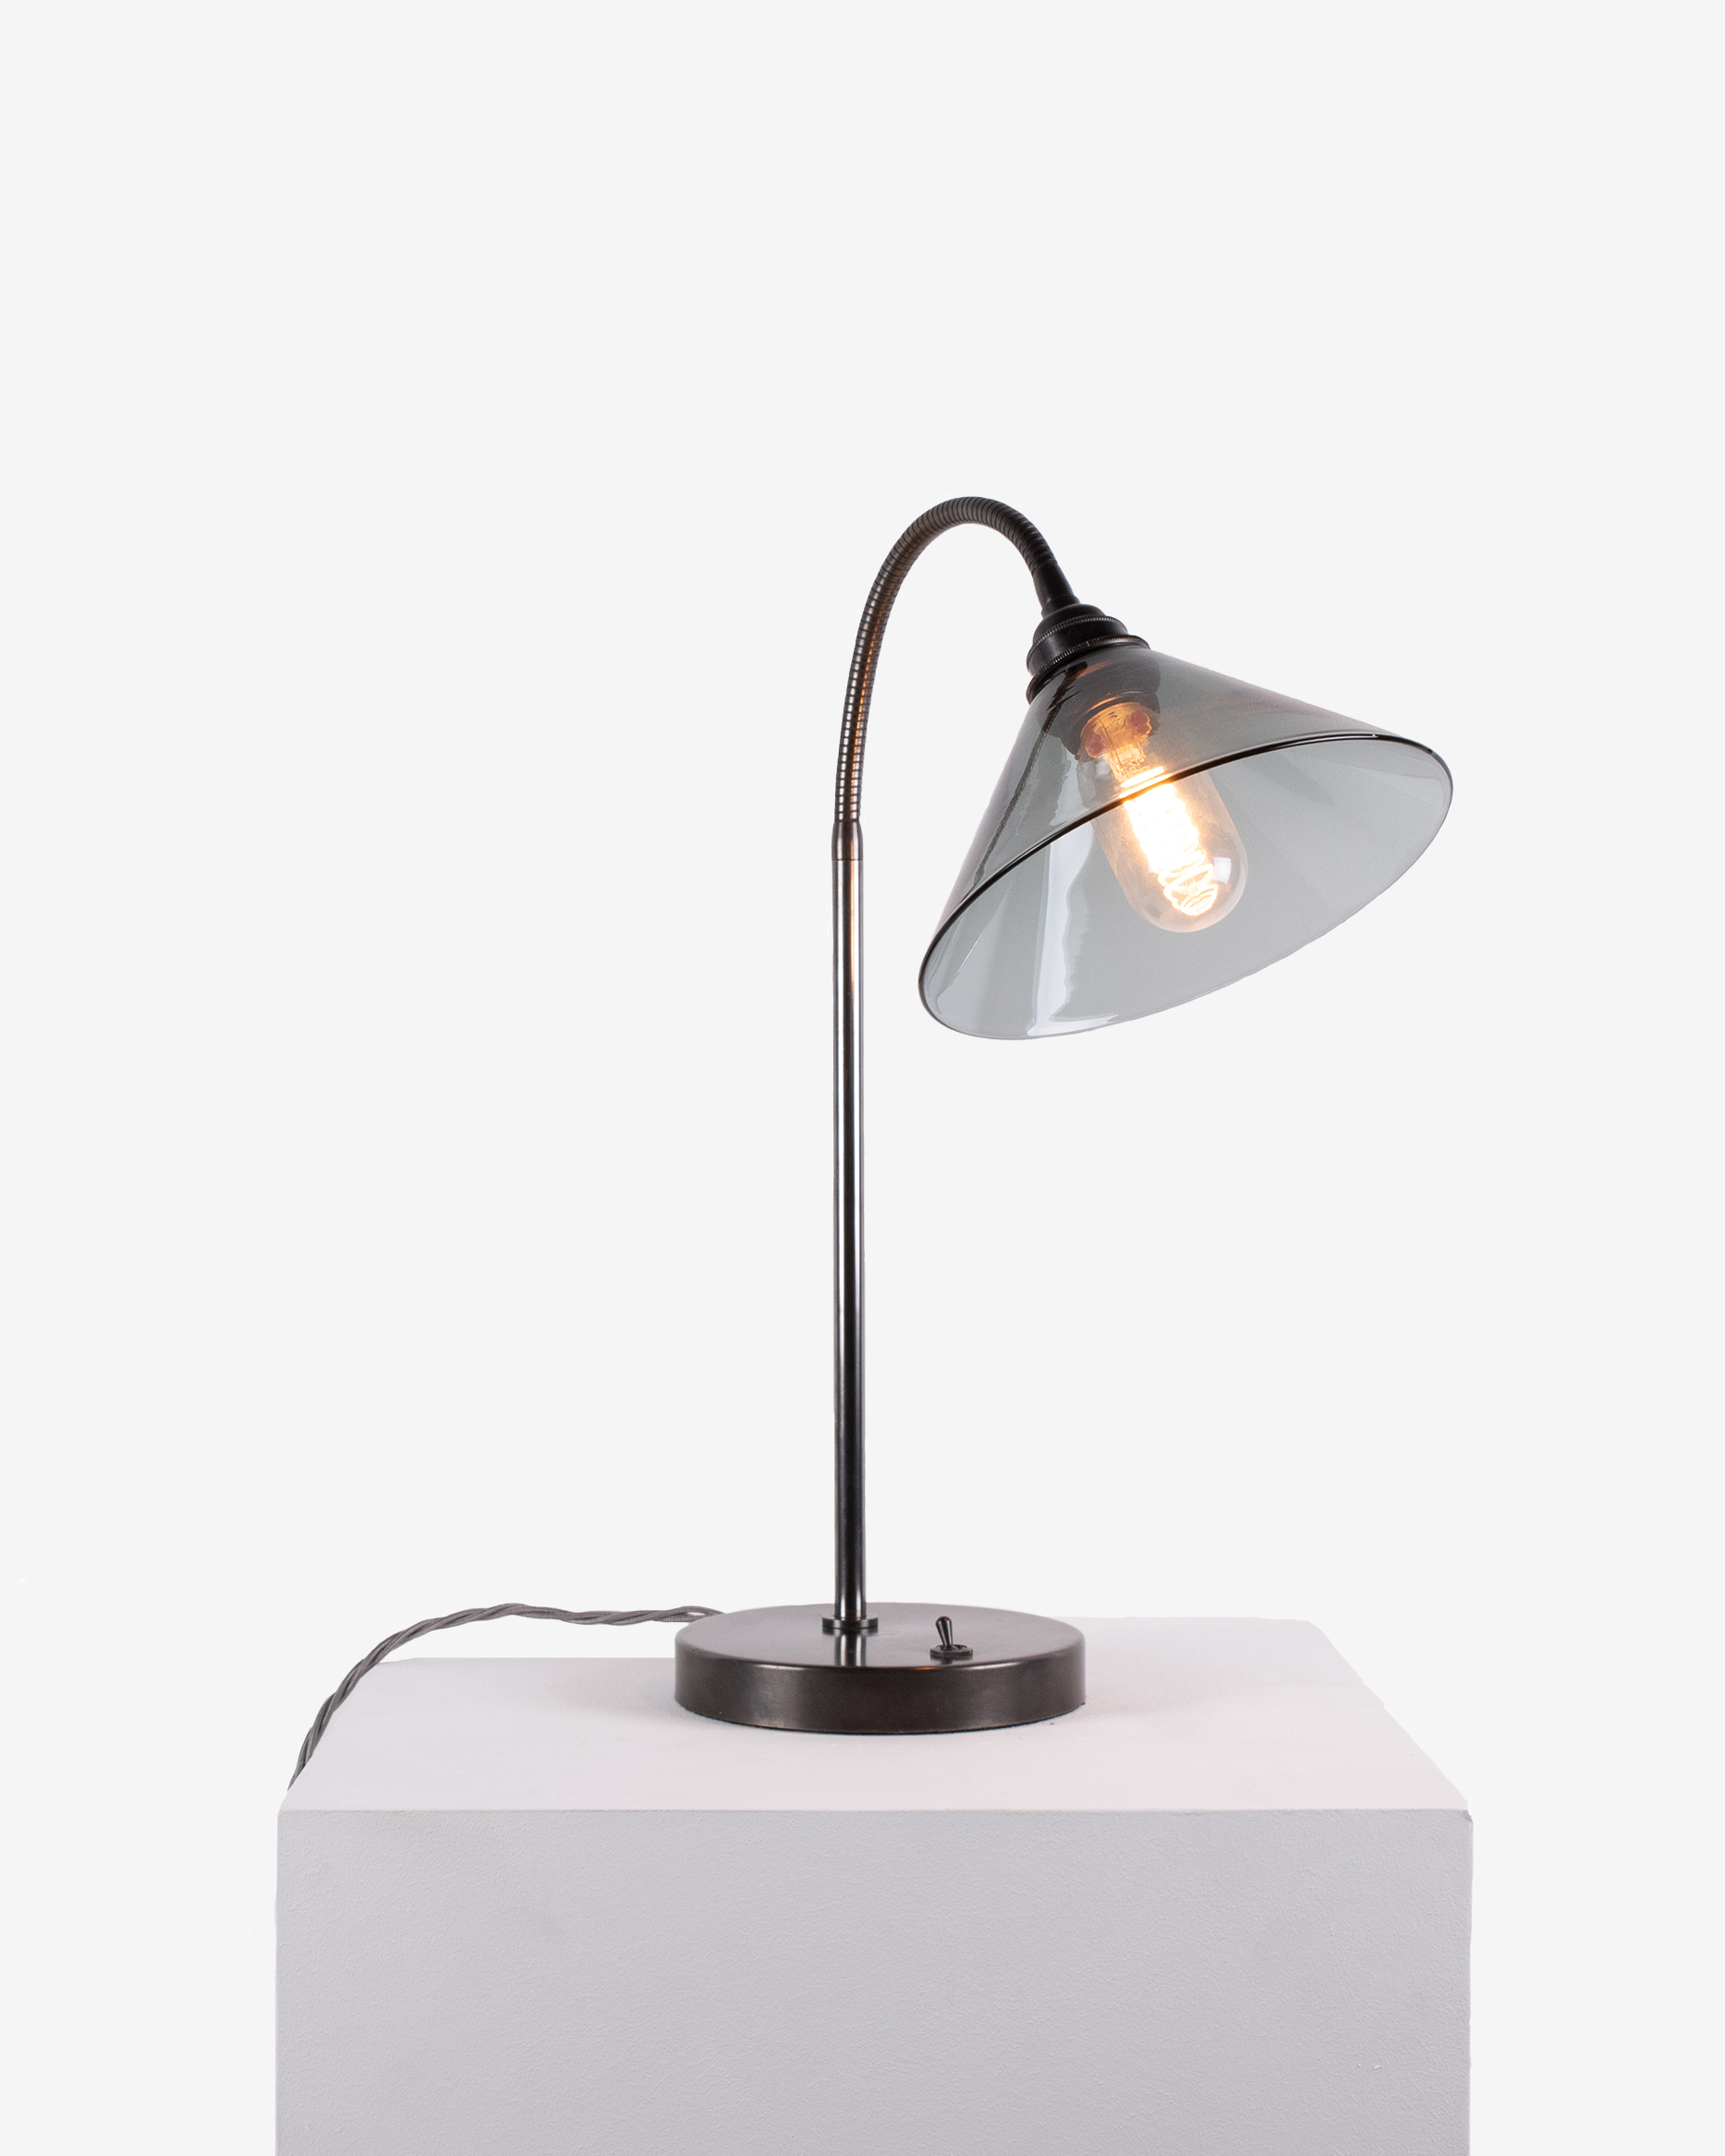 Adjustable Table Lamp with conical shade